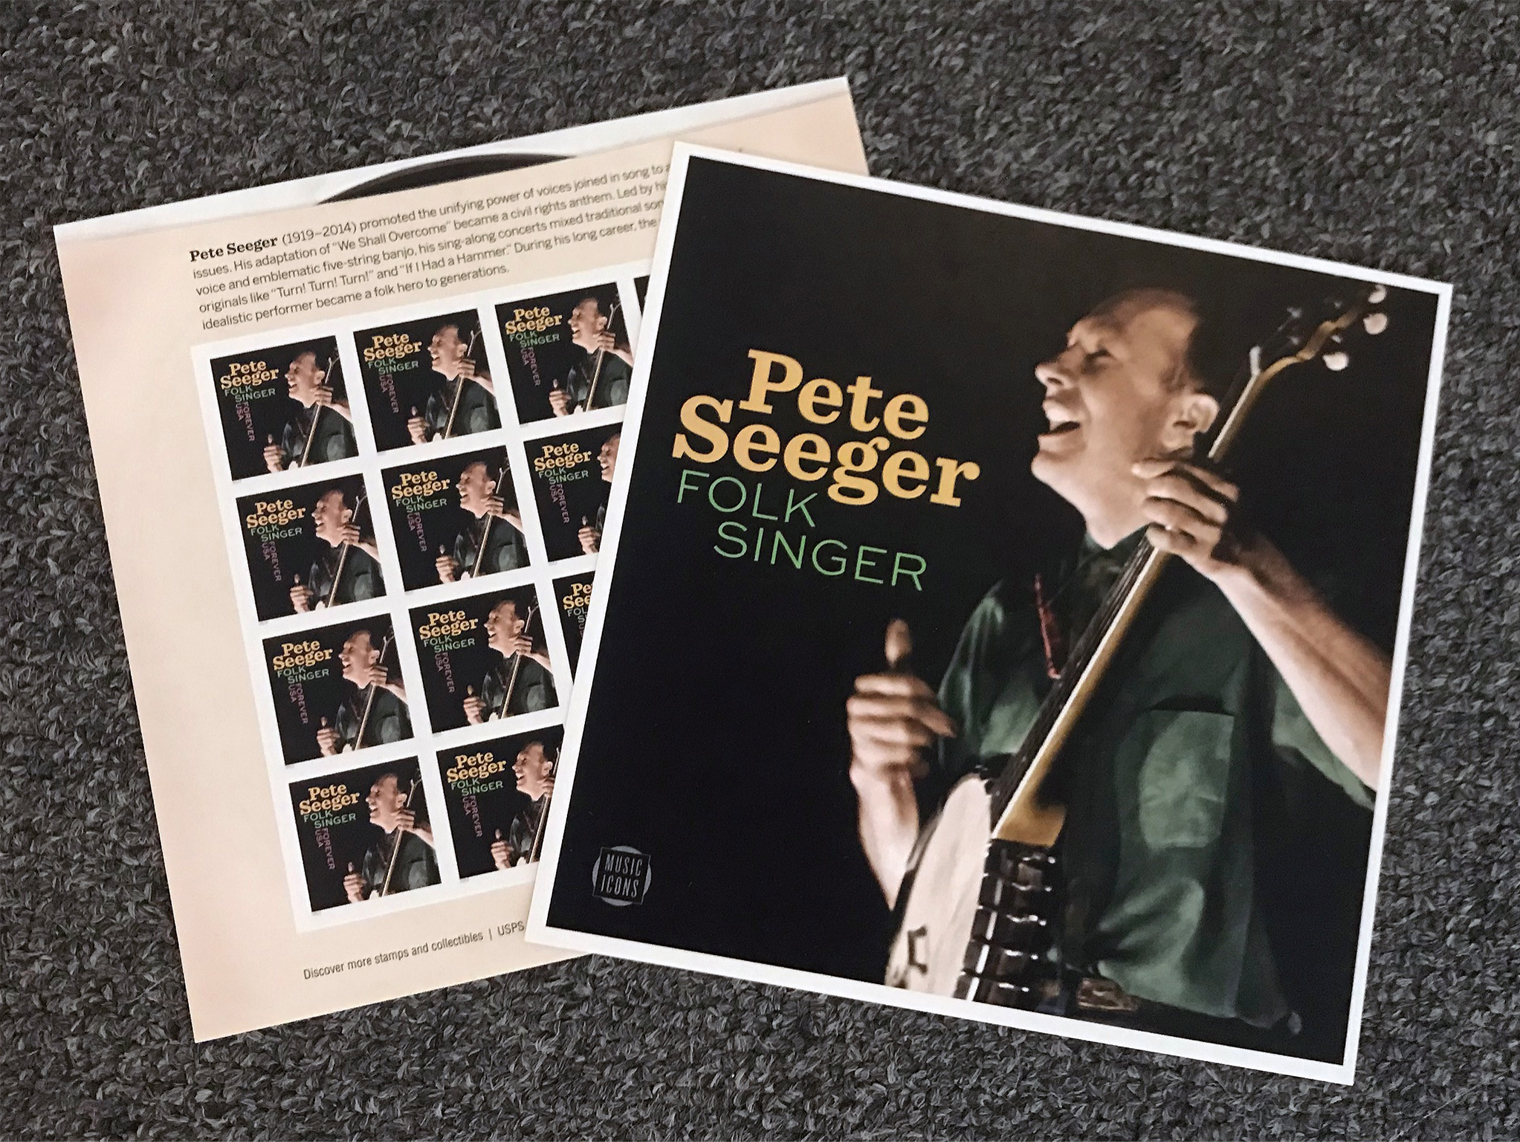 The Pete Seeger Folk Singer stamp sheet features a color photograph of him playing a banjo and a series of stamps on the verso with an illustration that mimics a record